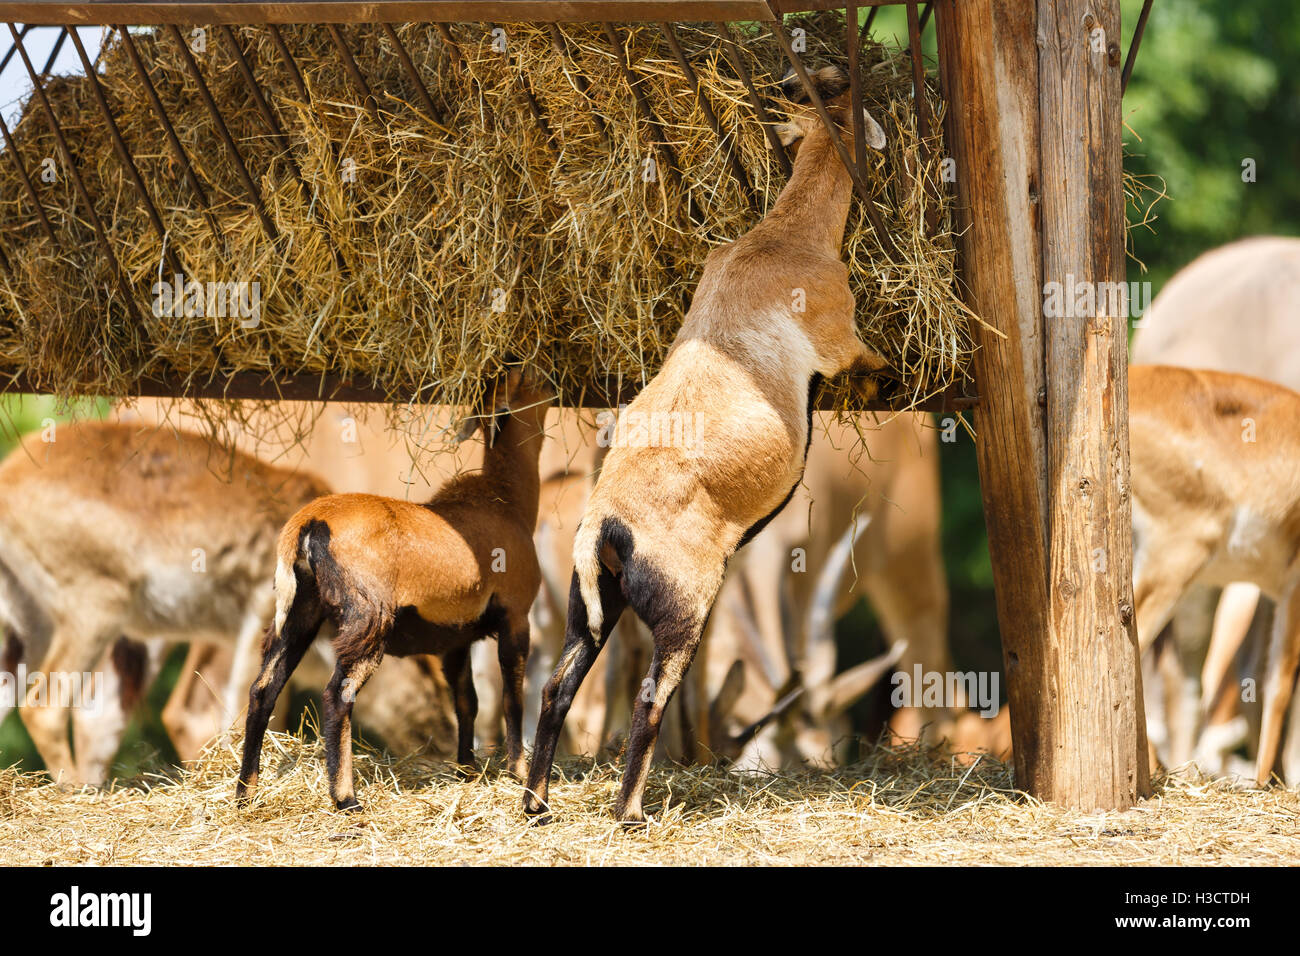 The herd of antelopes are feeding, summer time Stock Photo